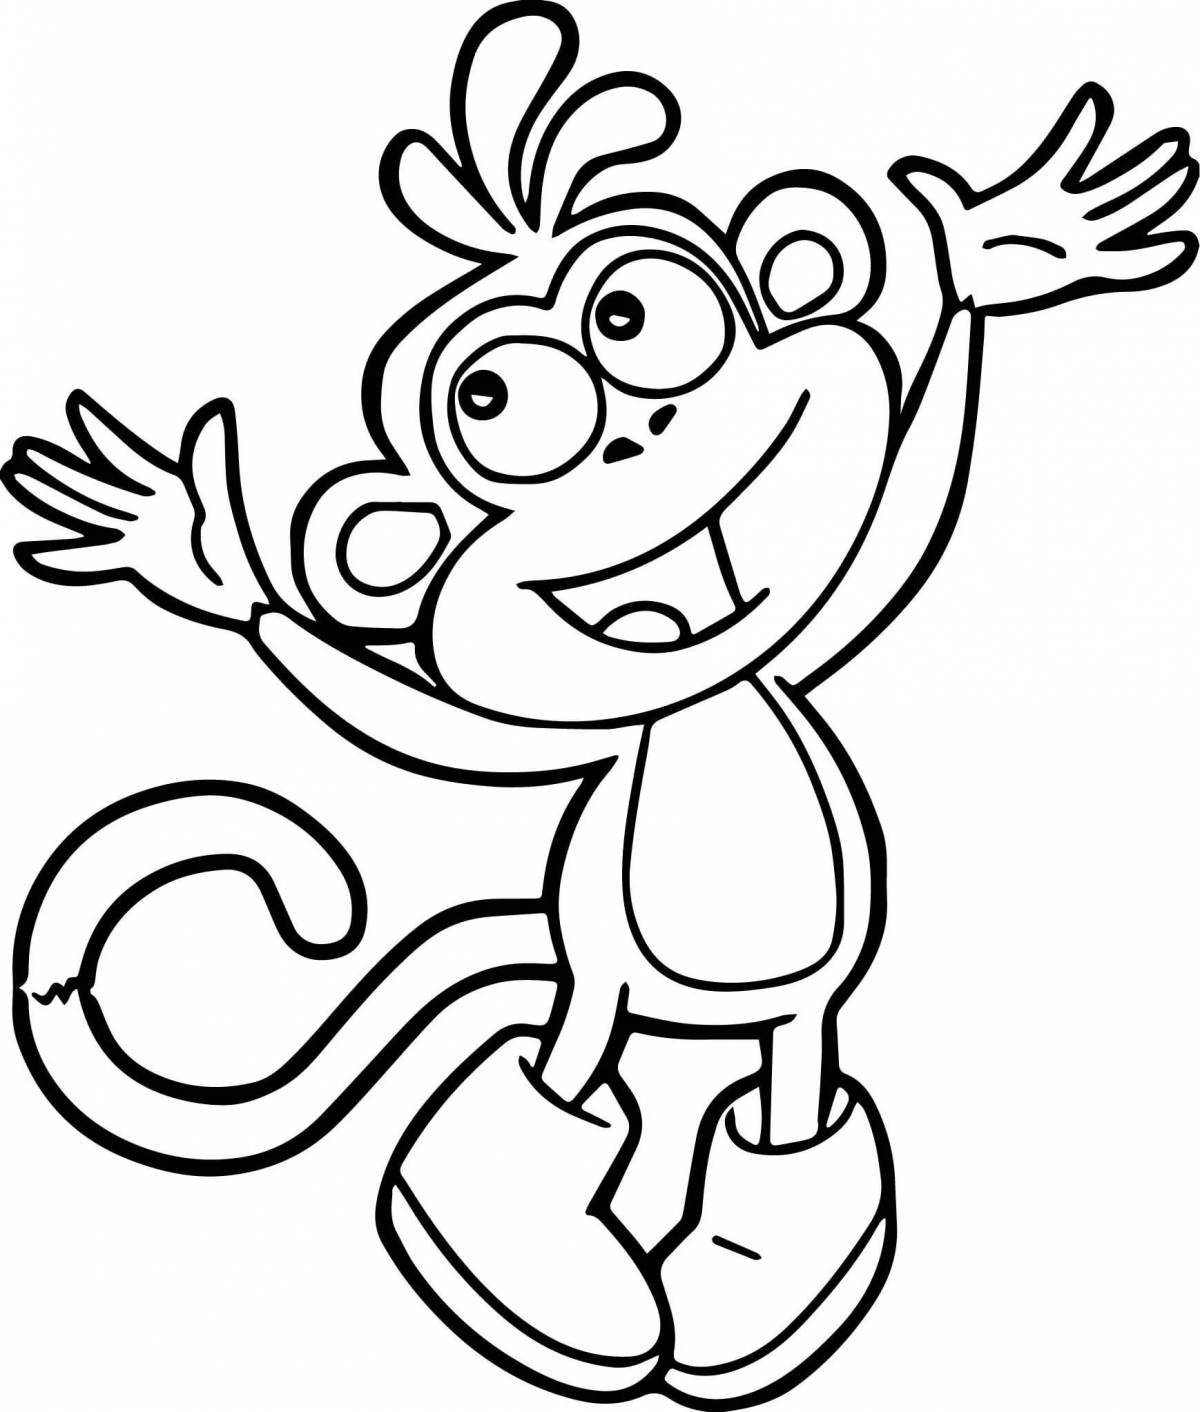 Delightful monkey coloring book